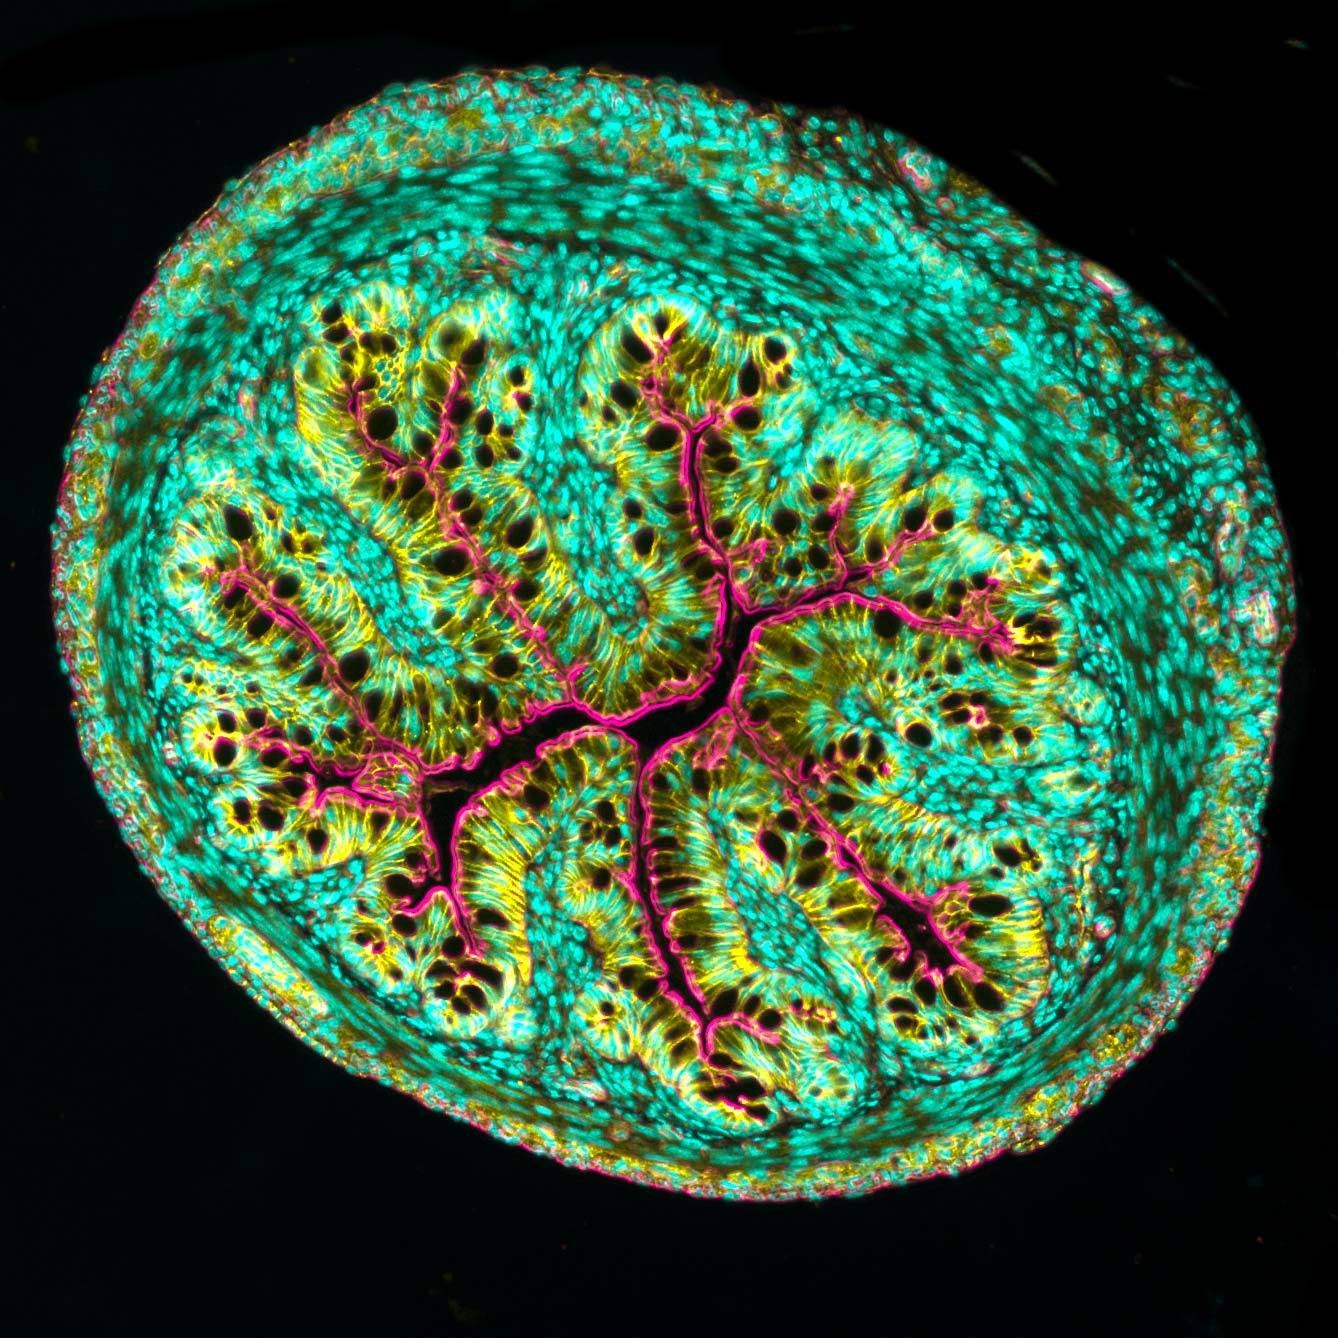 Cross section of a mouse intestine, shown at 10-times magnification.  (Image: Amy Engevik)